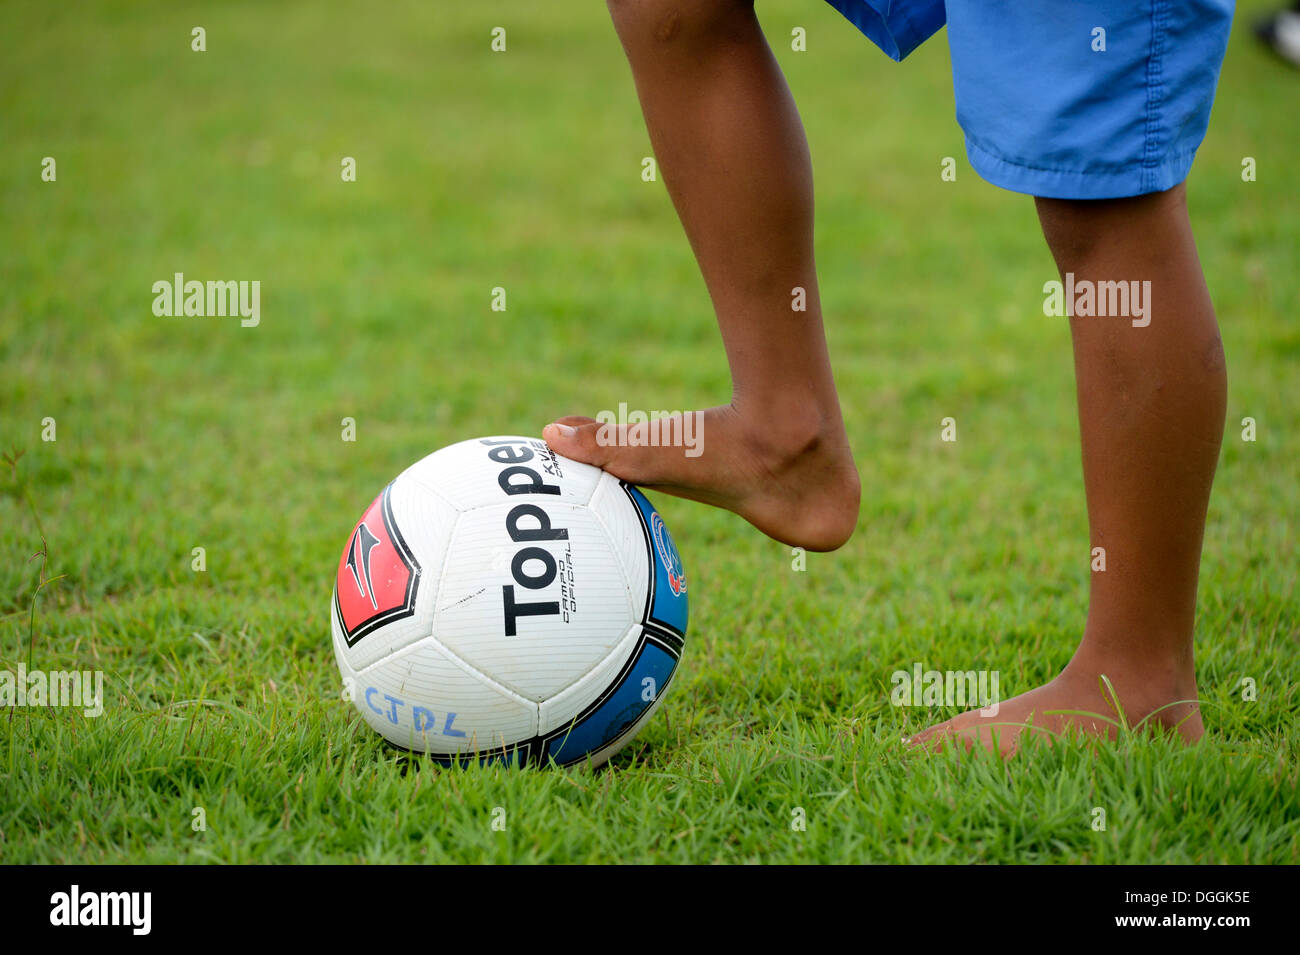 Barefoot boy, one foot on a football, social project in a favela